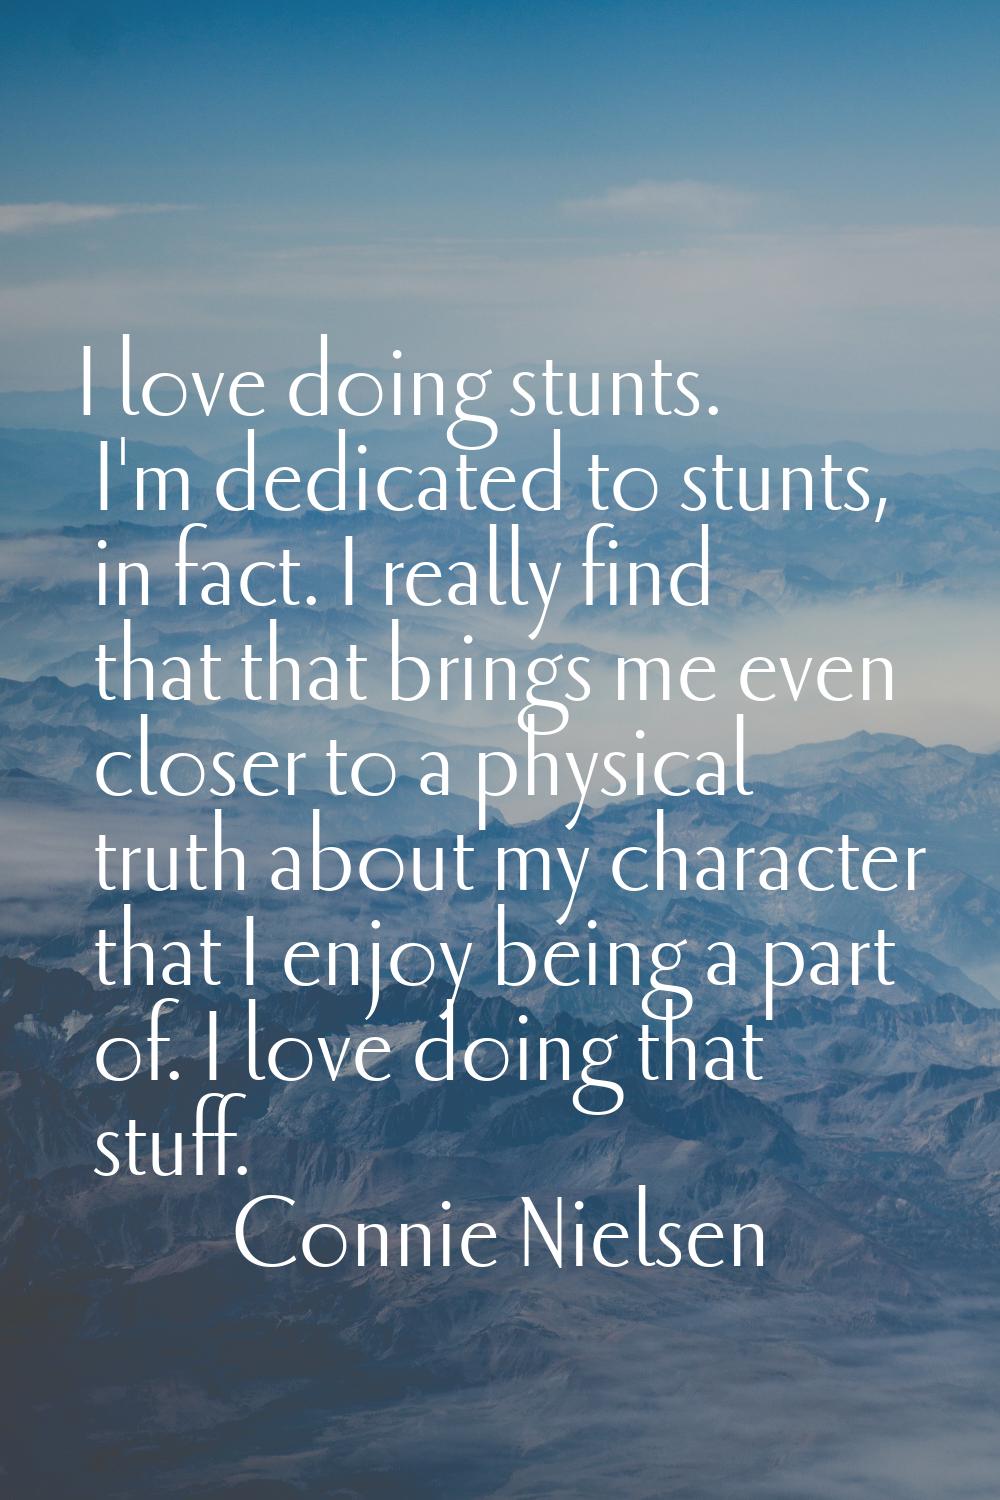 I love doing stunts. I'm dedicated to stunts, in fact. I really find that that brings me even close